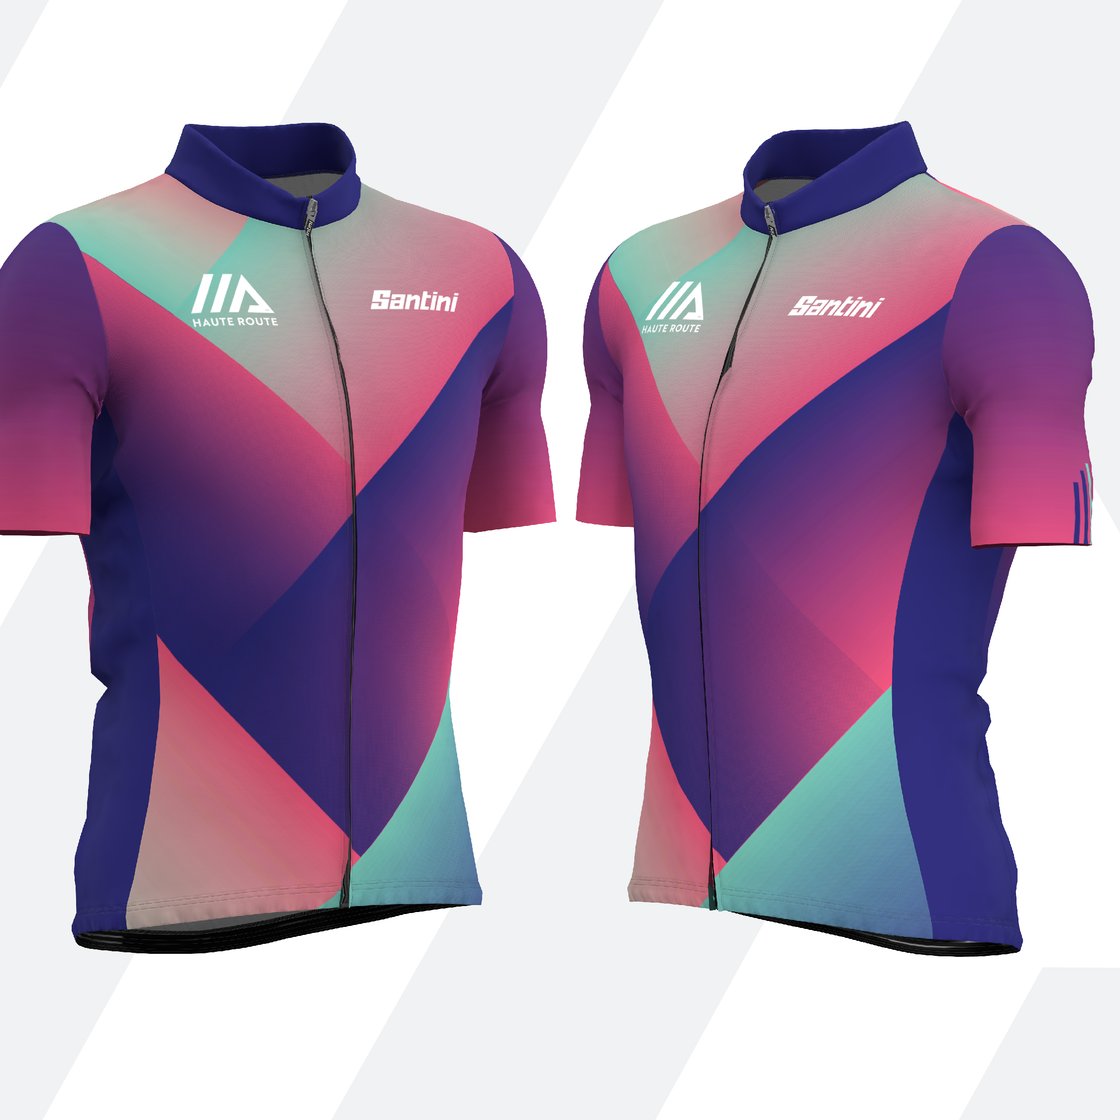 HR_Maillot2022_Launch_IG2